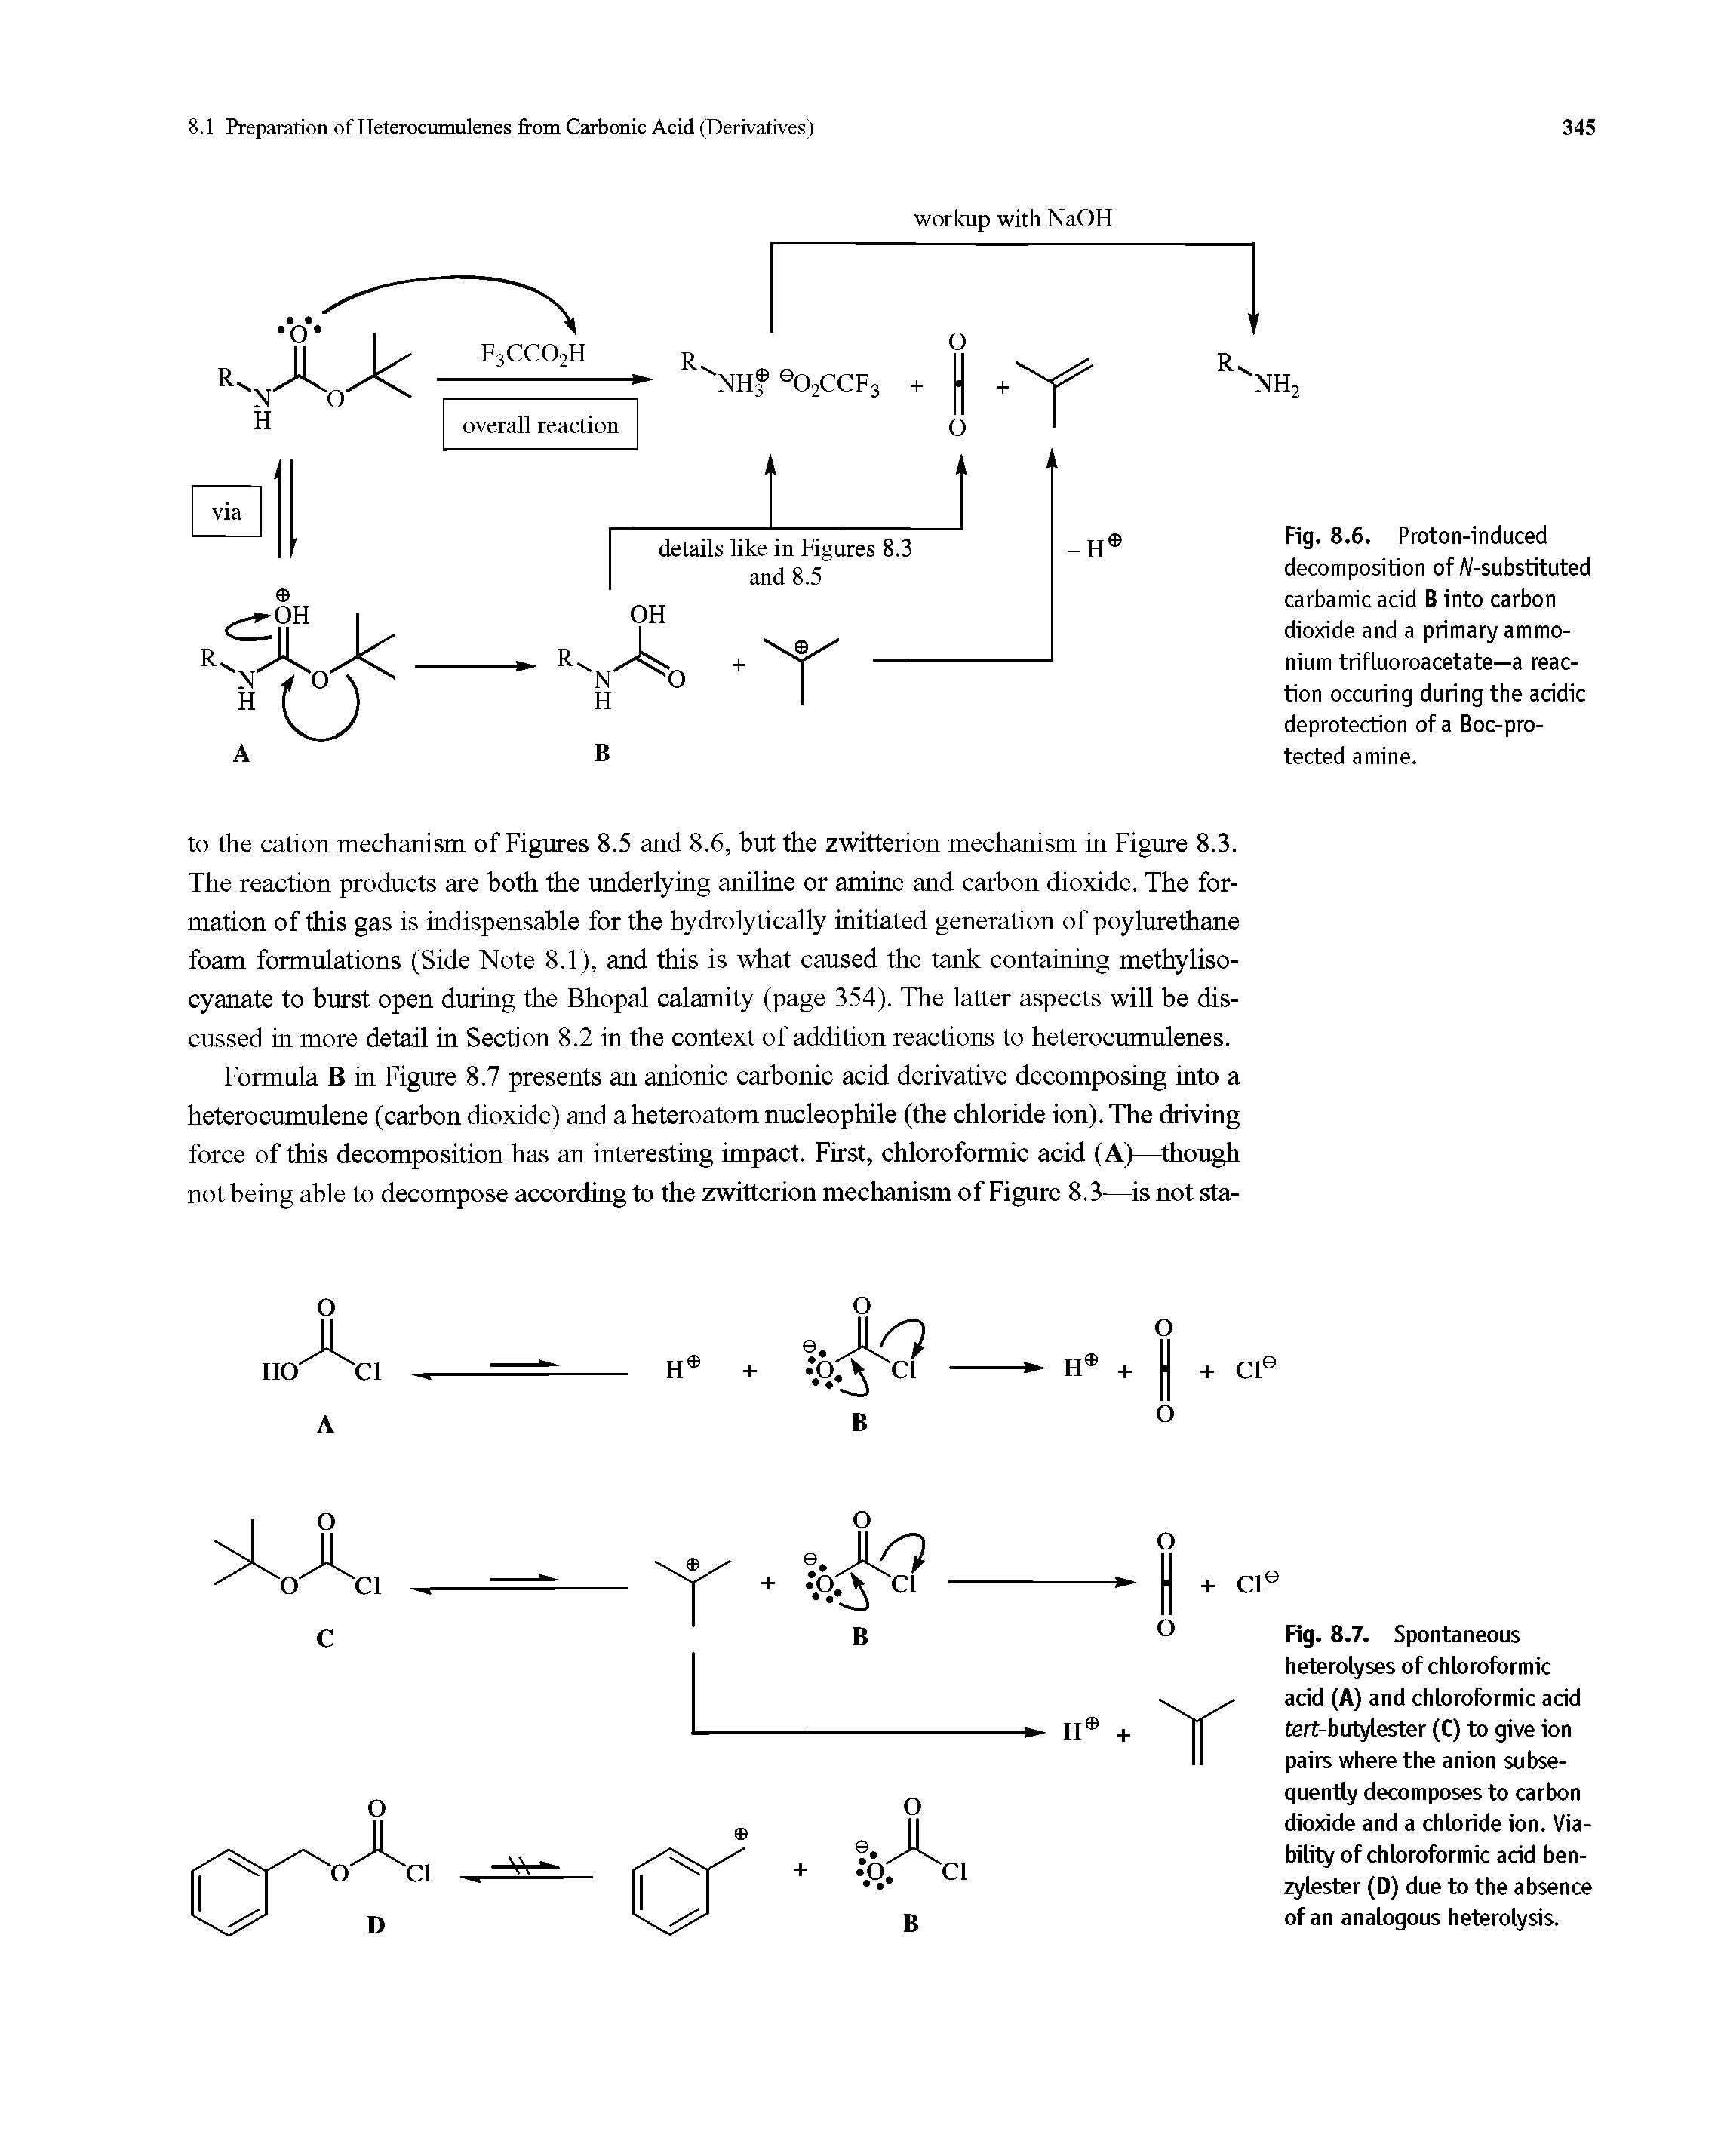 Fig. 8.6. Proton-induced decomposition of /(/-substituted carbamic acid B into carbon dioxide and a primary ammonium trifluoroacetate—a reaction occuring during the acidic deprotection of a Boc-pro-tected amine.